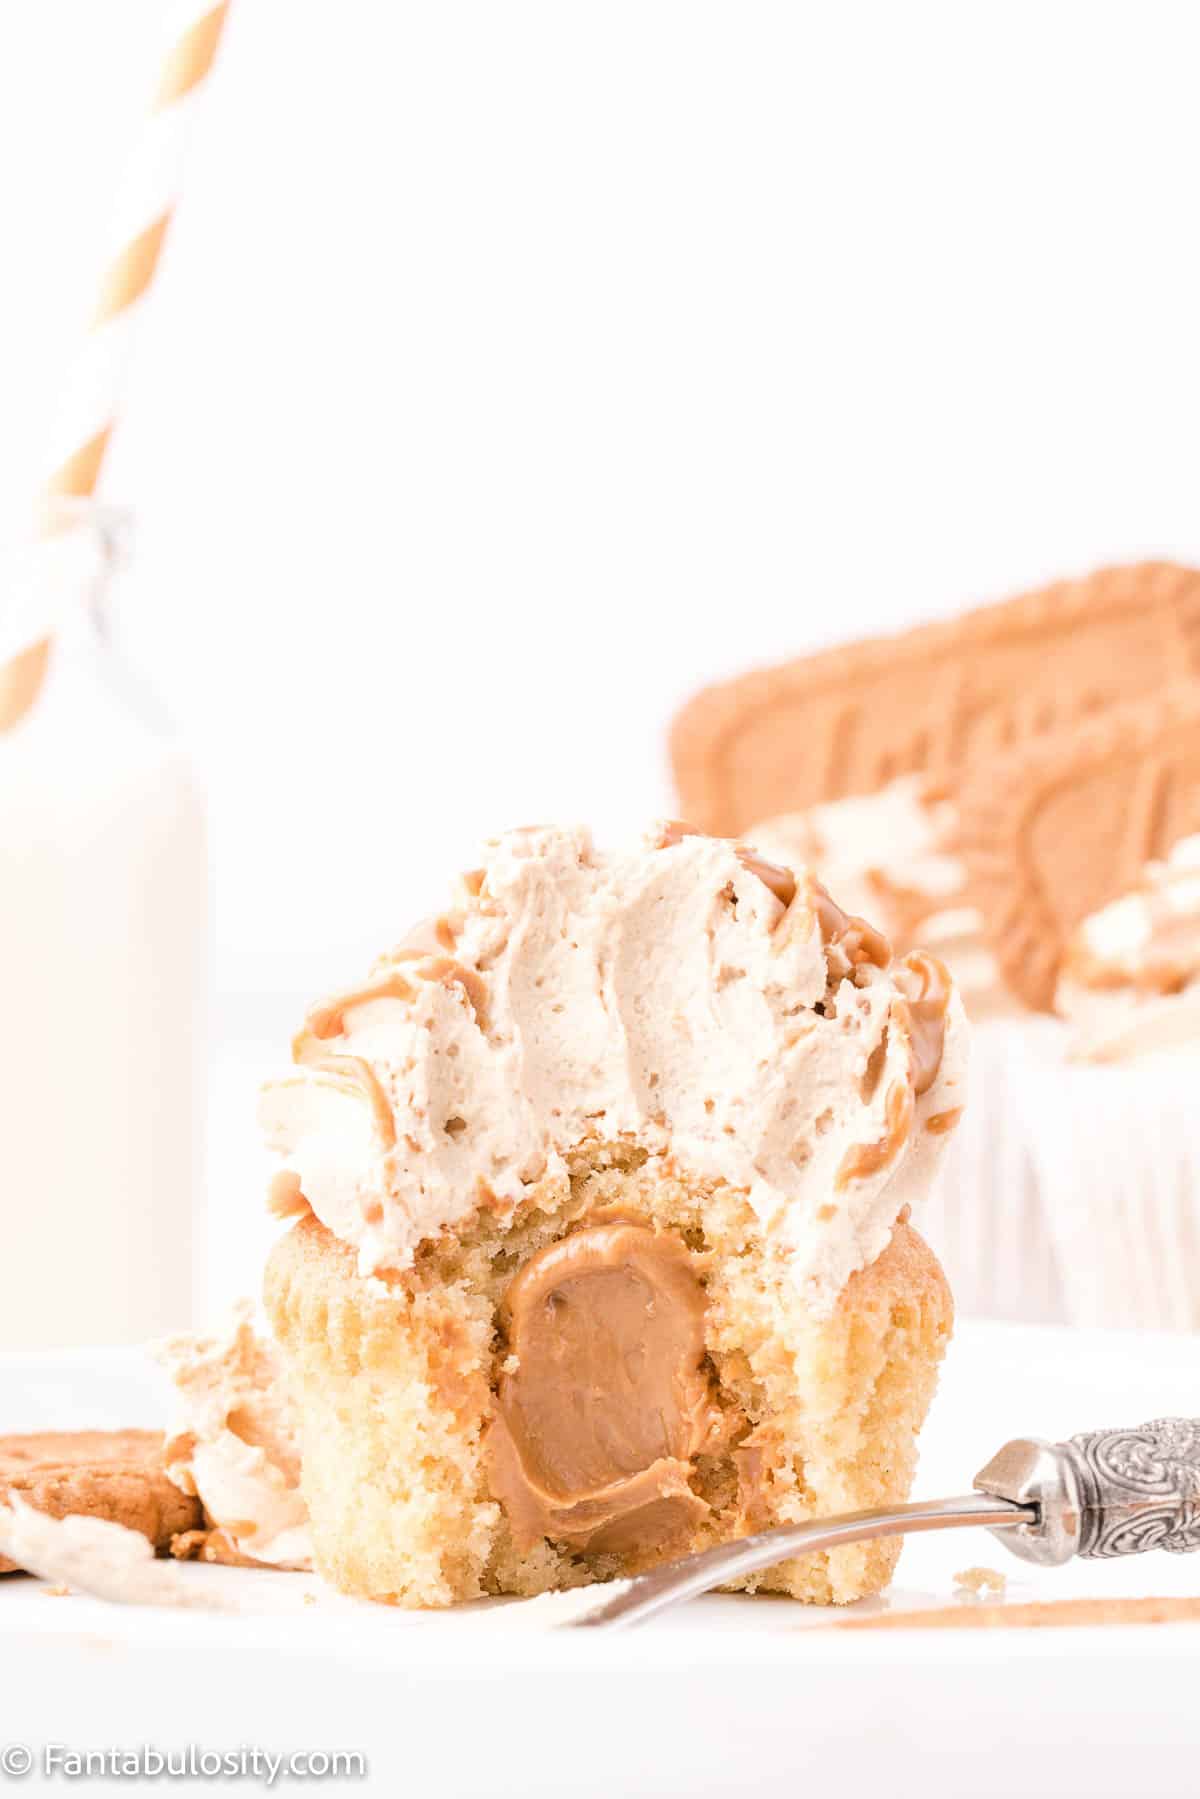 A frosted cupcake has been cut in half, revealing a center stuffed with Biscoff spread